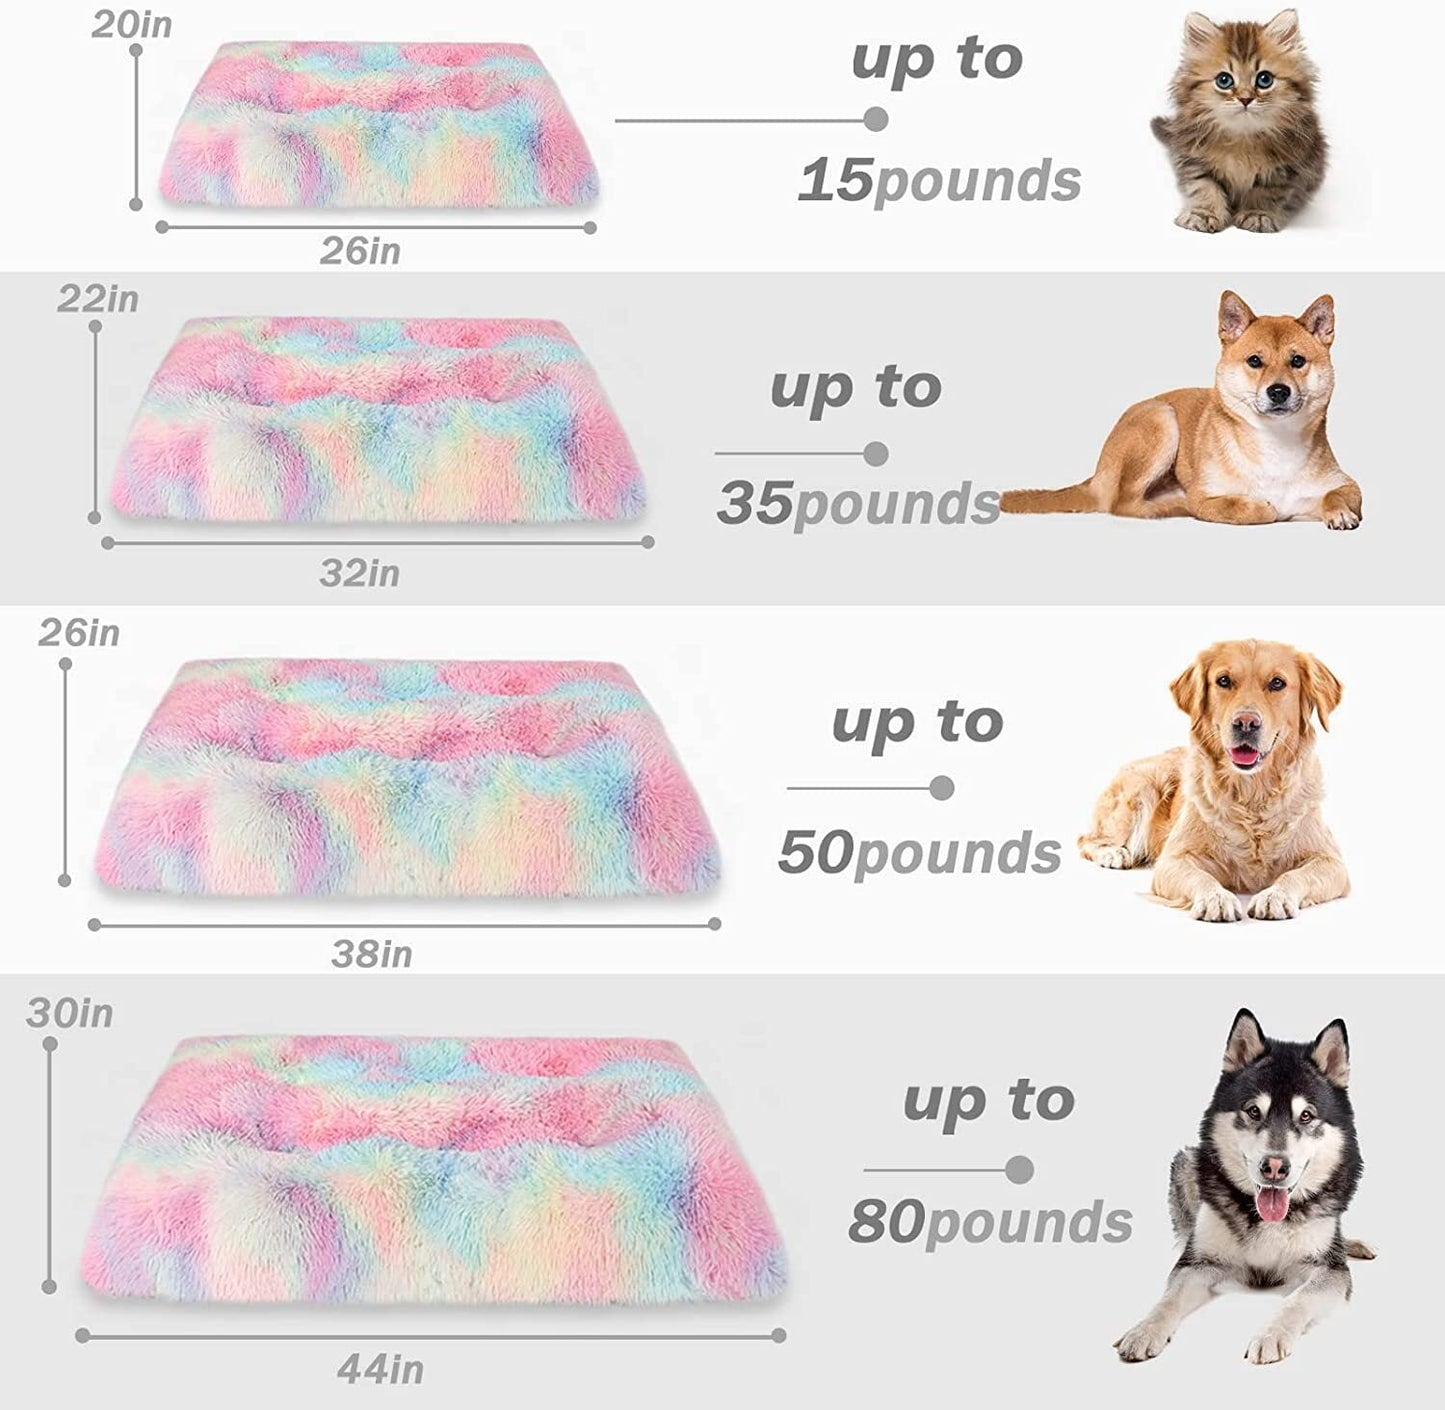 Exclusivo Mecla Soft Plush Dog Bed Crate Mat for Small Dogs (32*22*4 in), Faux Fur Fluffy Dog Pet Cat Kennel Pad with Anti-Slip Bottom, Machine Washable Rainbow